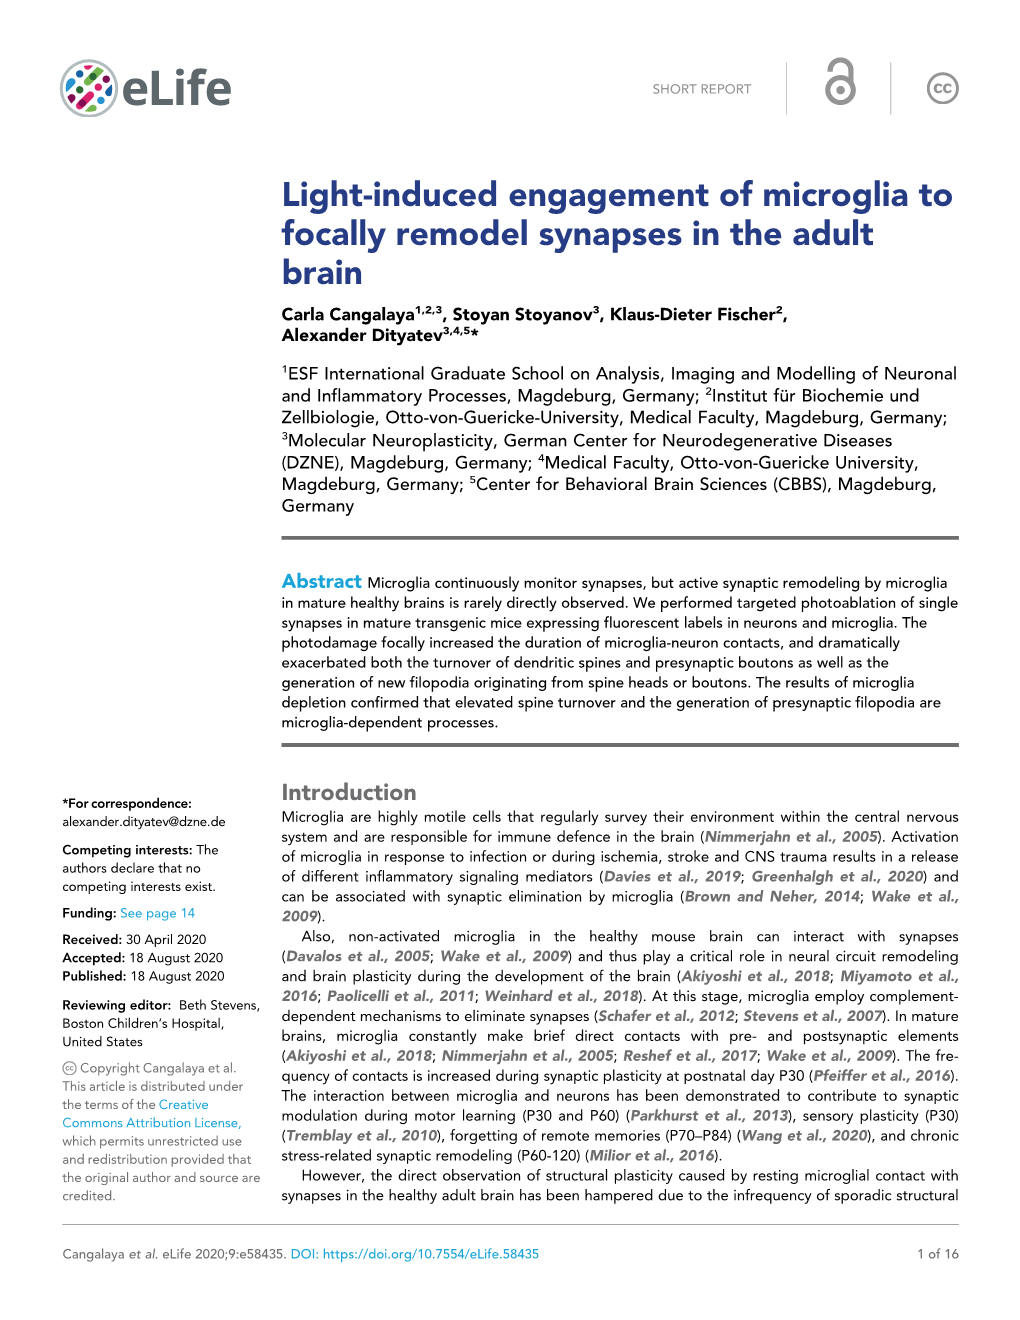 Light-Induced Engagement of Microglia to Focally Remodel